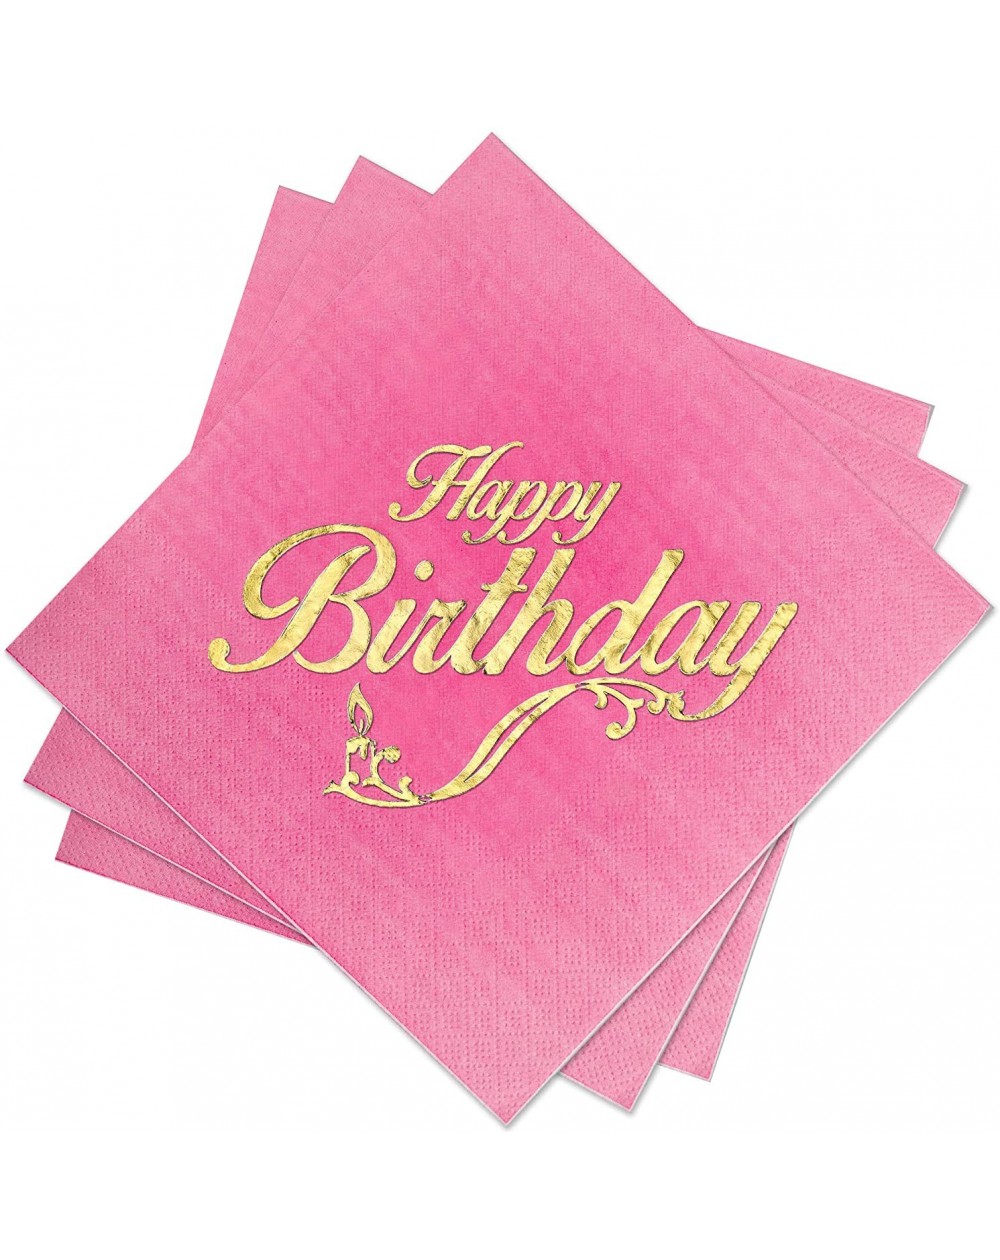 Tableware Birthday Party Lunch Napkins - 3 Colors Pink Ombre- Blue Ombre or Ivory - 3 Ply - Size 6.5 x 6.5 Inches (50 Pack) -...